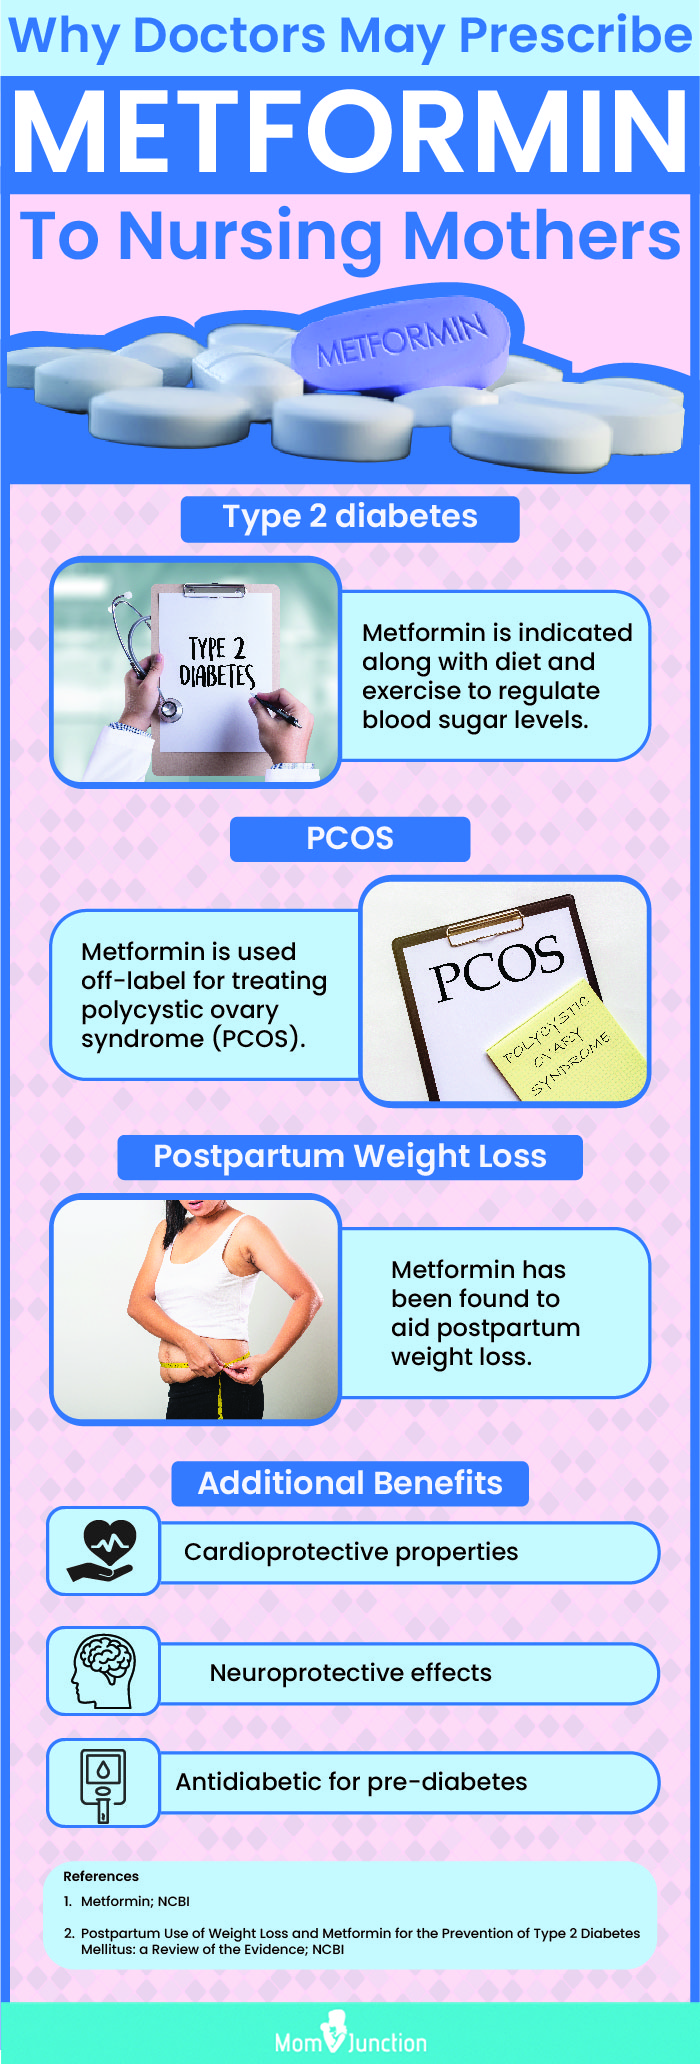 uses of metformin for breastfeeding mothers (infographic)